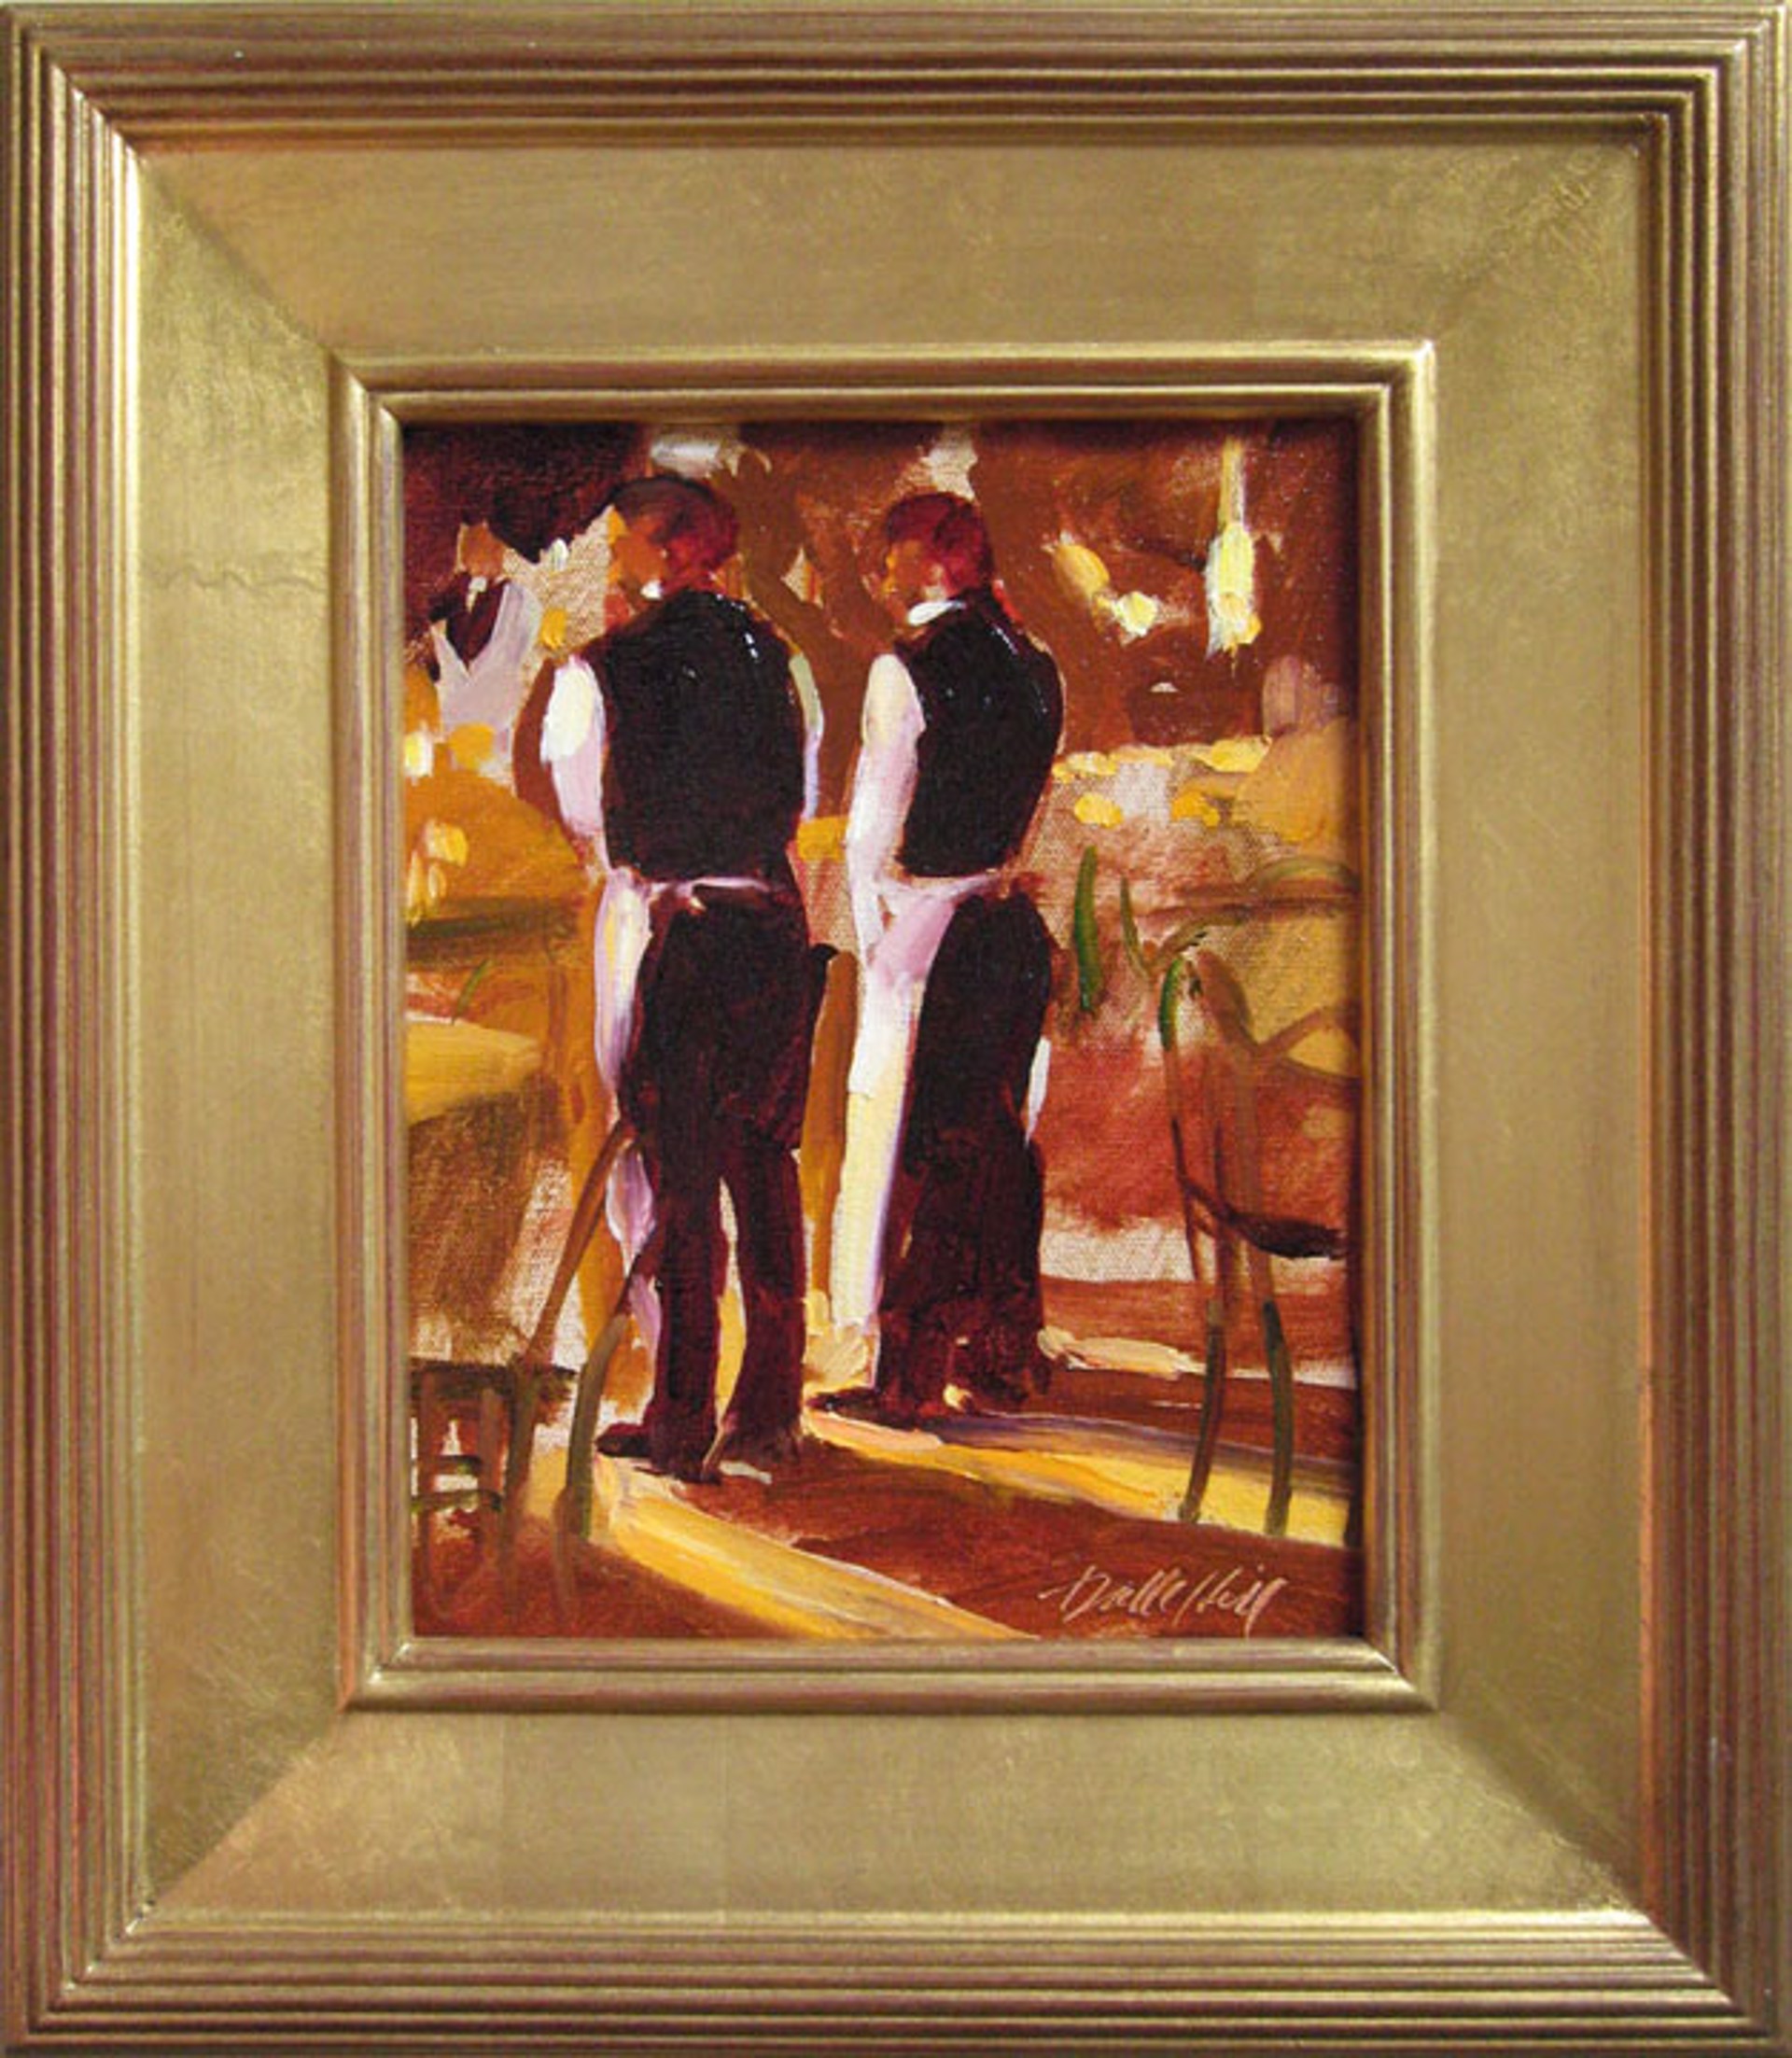 The Waiters by Darrell Hill